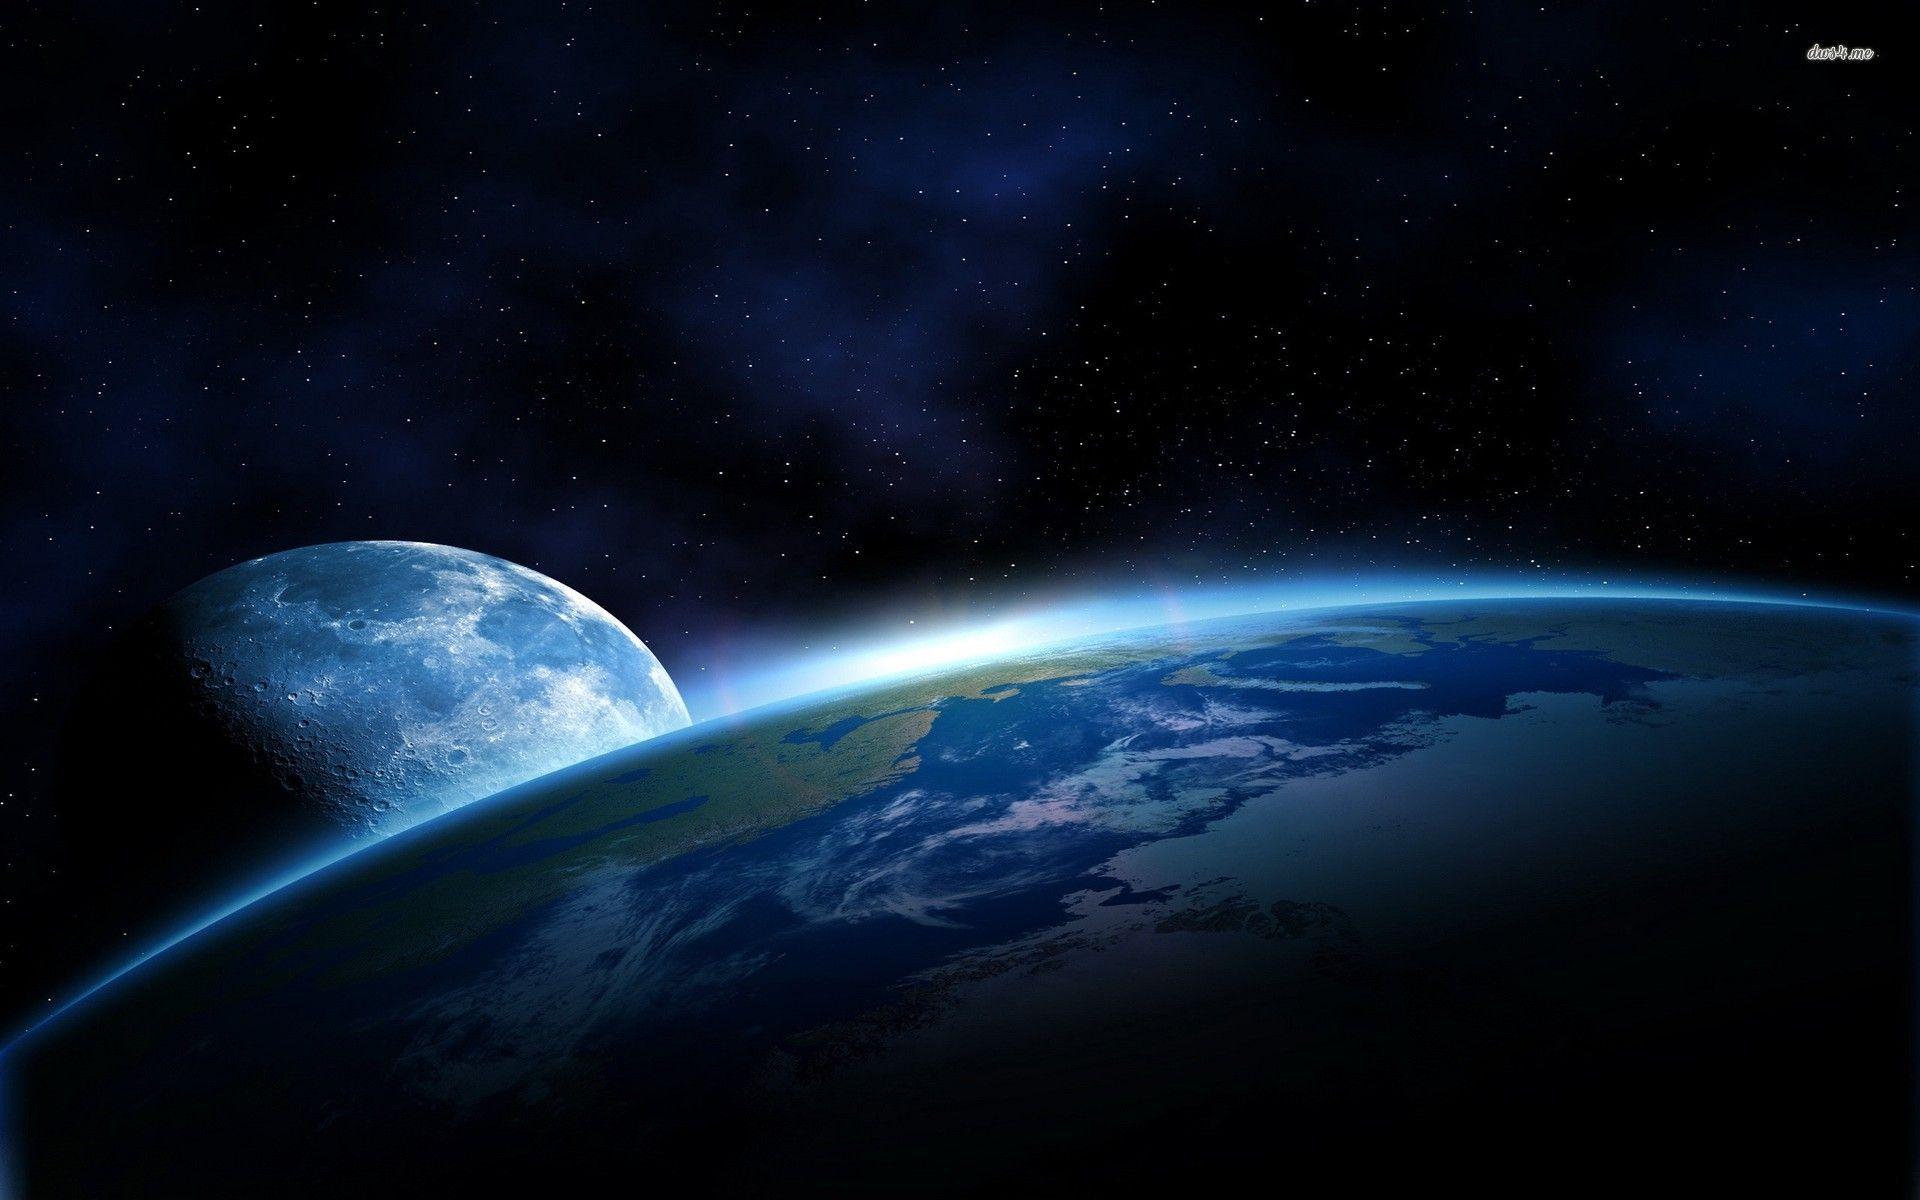  Earth  and Moon  Wallpapers  Top Free Earth  and Moon  